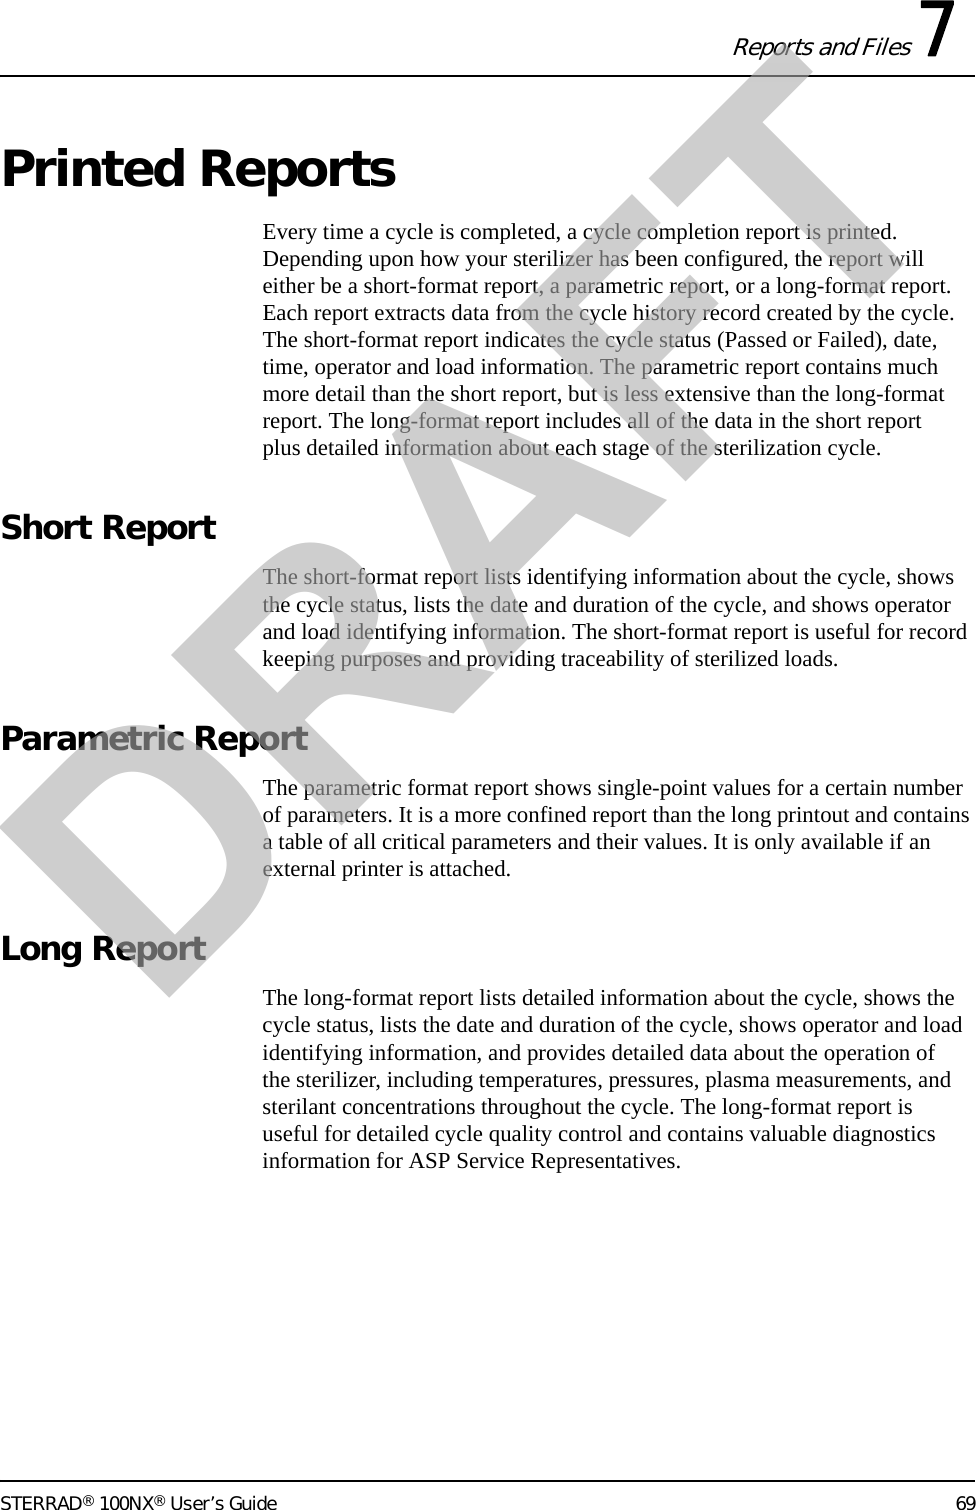 Reports and Files 7STERRAD® 100NX® User’s Guide 69Printed ReportsEvery time a cycle is completed, a cycle completion report is printed. Depending upon how your sterilizer has been configured, the report will either be a short-format report, a parametric report, or a long-format report. Each report extracts data from the cycle history record created by the cycle. The short-format report indicates the cycle status (Passed or Failed), date, time, operator and load information. The parametric report contains much more detail than the short report, but is less extensive than the long-format report. The long-format report includes all of the data in the short report plus detailed information about each stage of the sterilization cycle.Short ReportThe short-format report lists identifying information about the cycle, shows the cycle status, lists the date and duration of the cycle, and shows operator and load identifying information. The short-format report is useful for record keeping purposes and providing traceability of sterilized loads. Parametric ReportThe parametric format report shows single-point values for a certain number of parameters. It is a more confined report than the long printout and contains a table of all critical parameters and their values. It is only available if an external printer is attached.Long ReportThe long-format report lists detailed information about the cycle, shows the cycle status, lists the date and duration of the cycle, shows operator and load identifying information, and provides detailed data about the operation of the sterilizer, including temperatures, pressures, plasma measurements, and sterilant concentrations throughout the cycle. The long-format report is useful for detailed cycle quality control and contains valuable diagnostics information for ASP Service Representatives.DRAFT